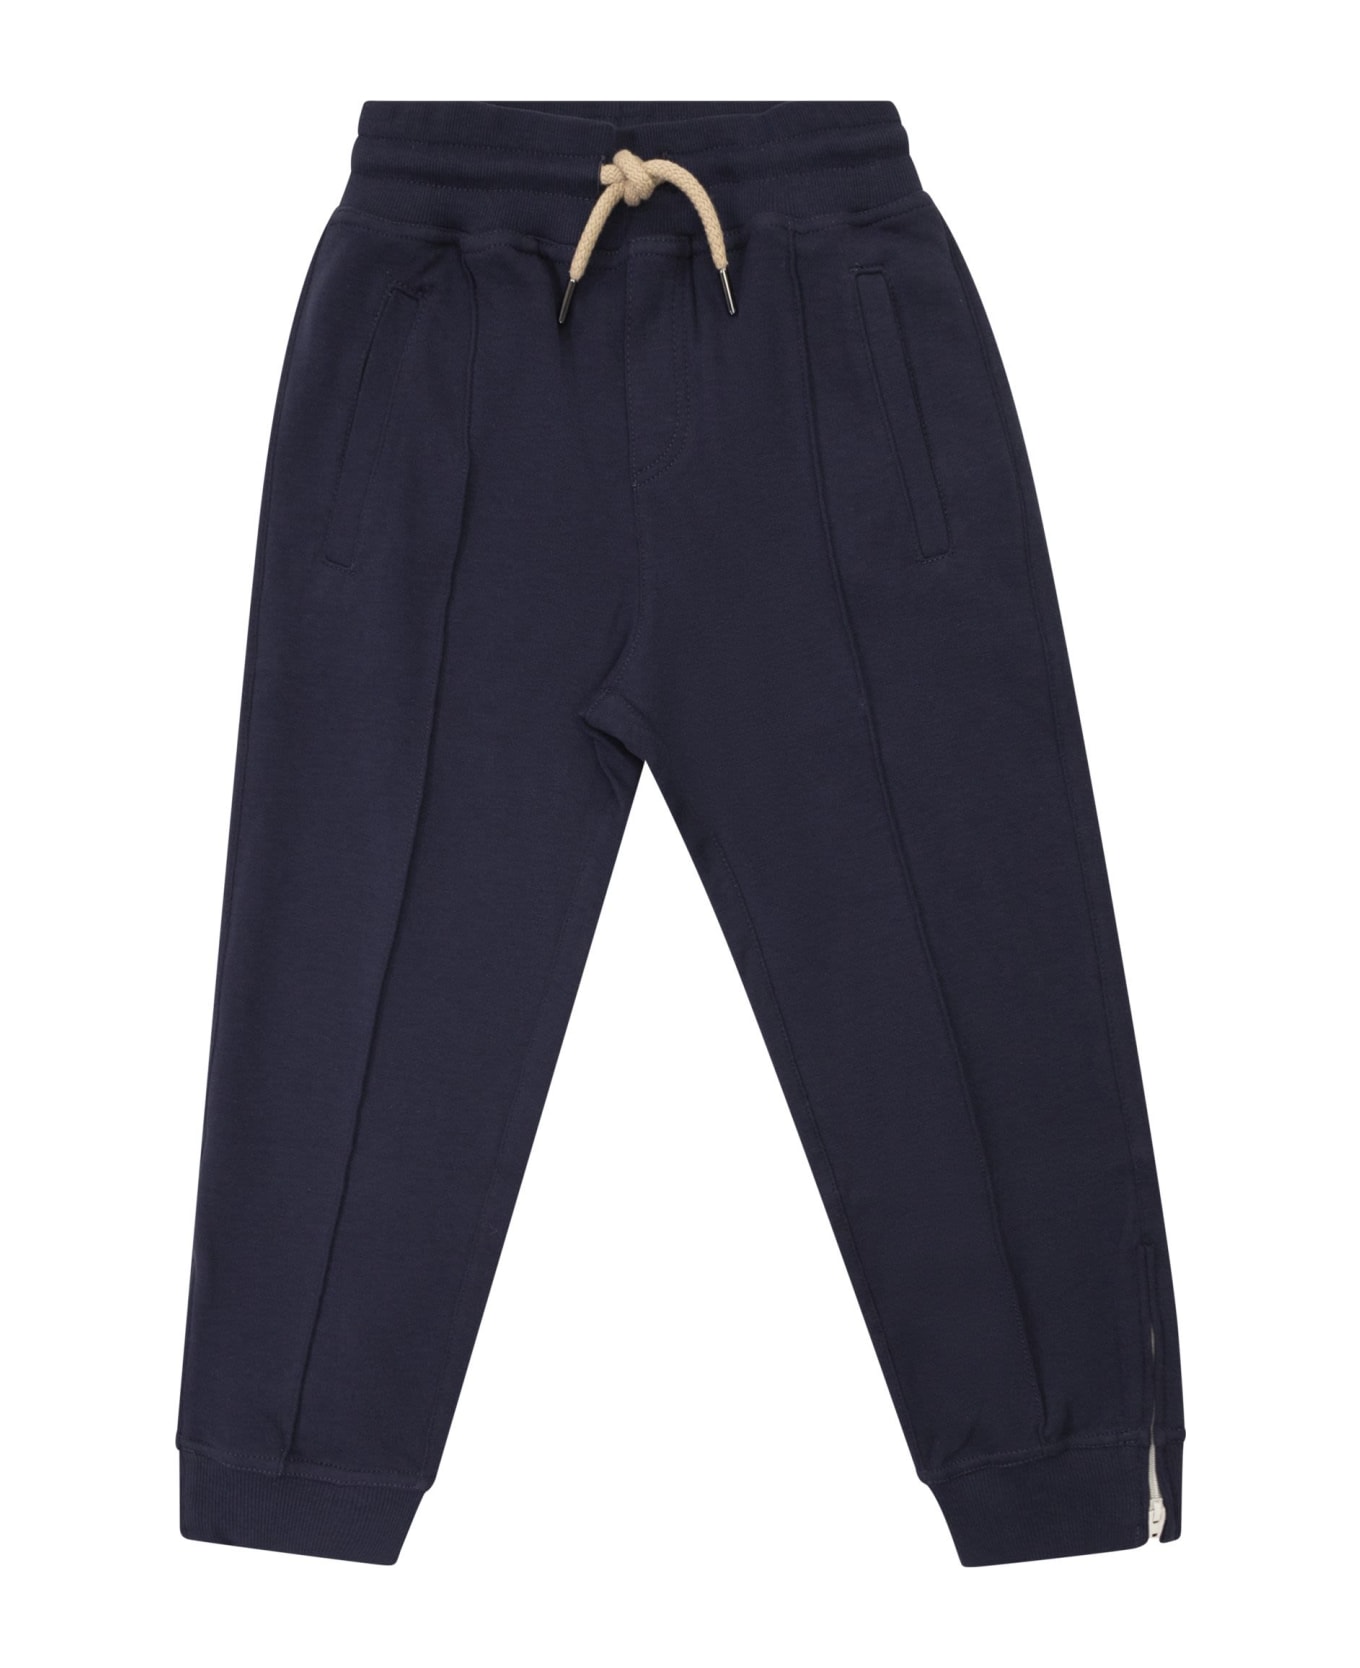 Brunello Cucinelli Techno Cotton Fleece Trousers With Crête And Elasticated Bottom With Zip - Blue ボトムス